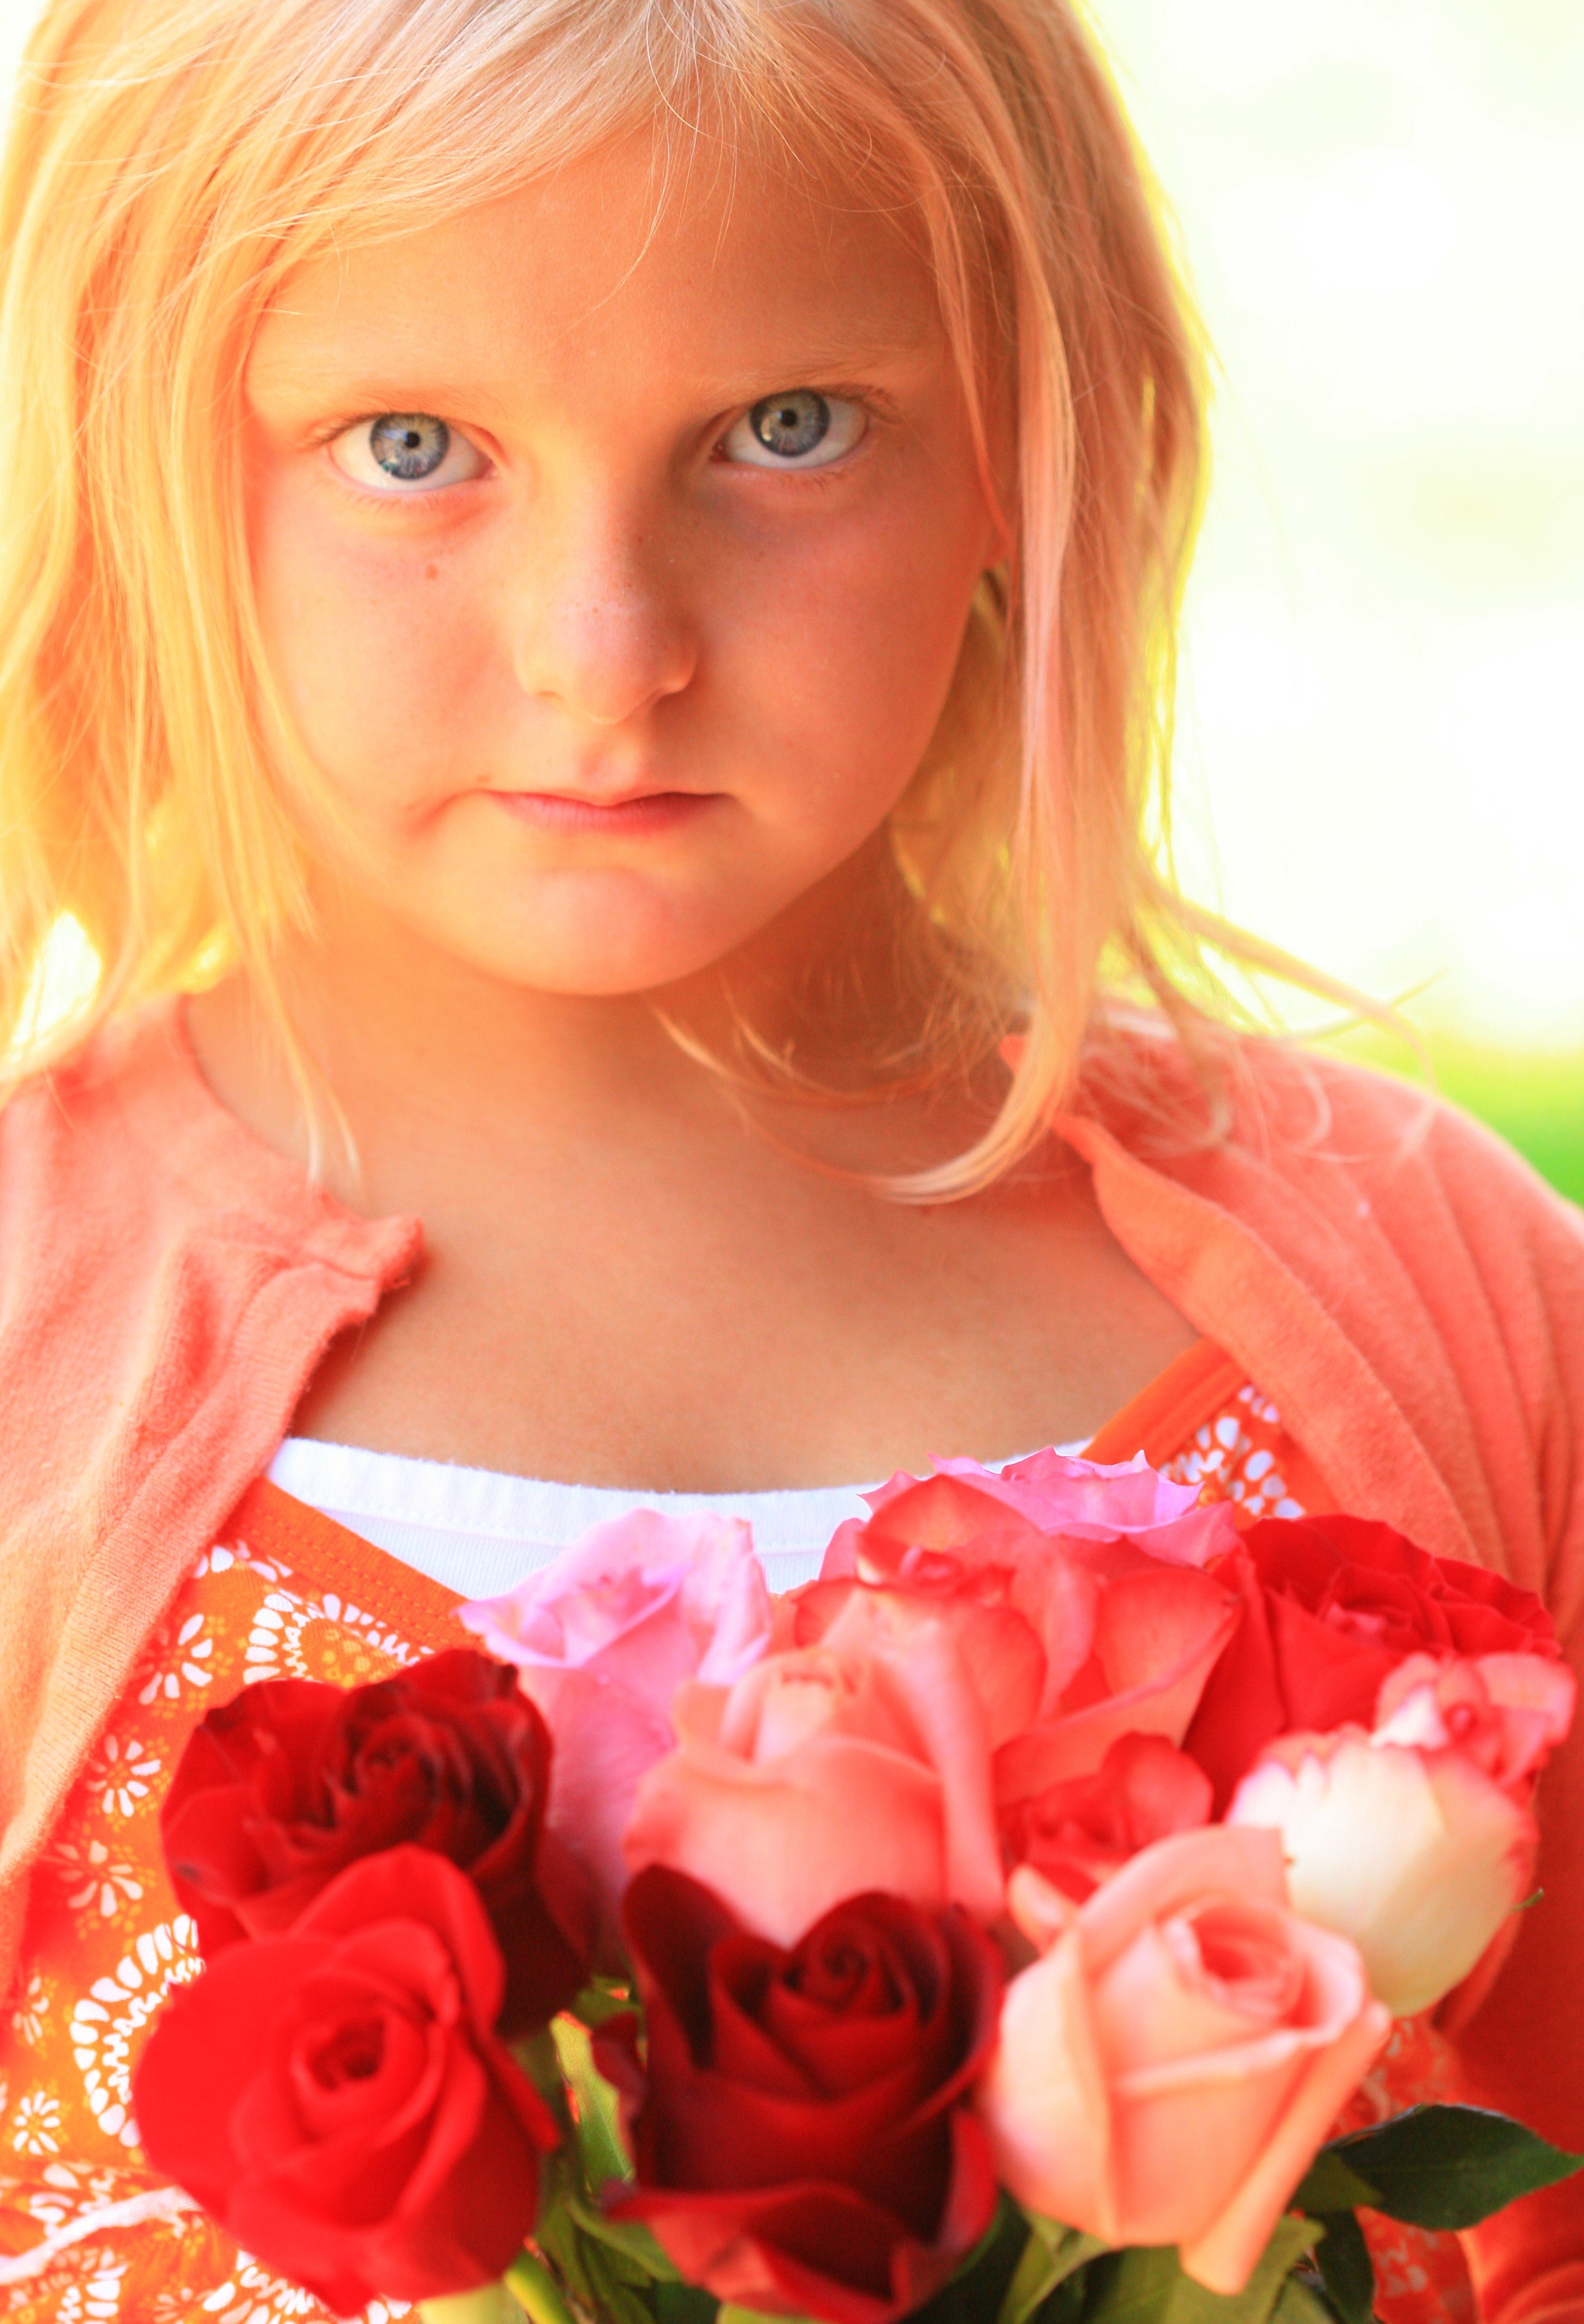 Sweet Little Girl with Roses